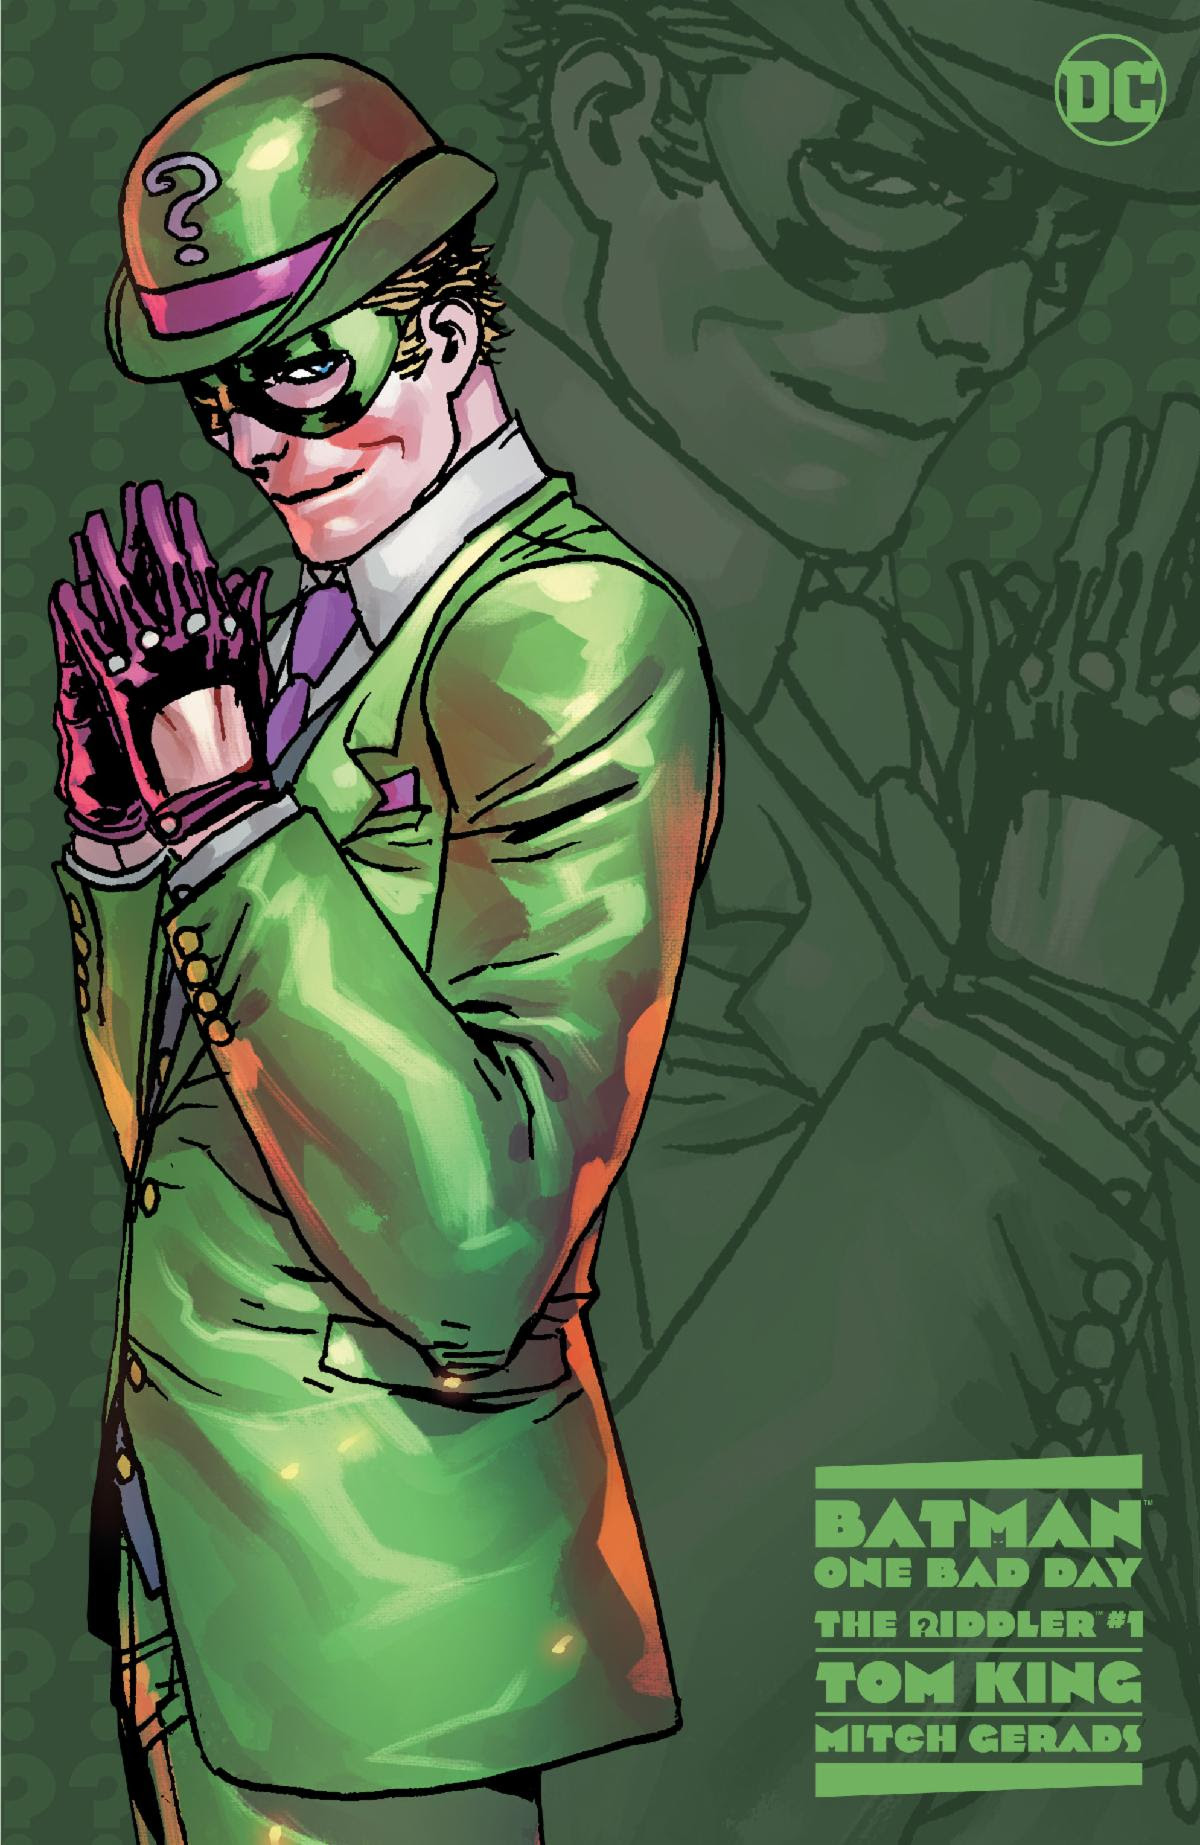 Batman One Bad Day The Riddler #1 Second Printing Cover A Giuseppe Camuncoli